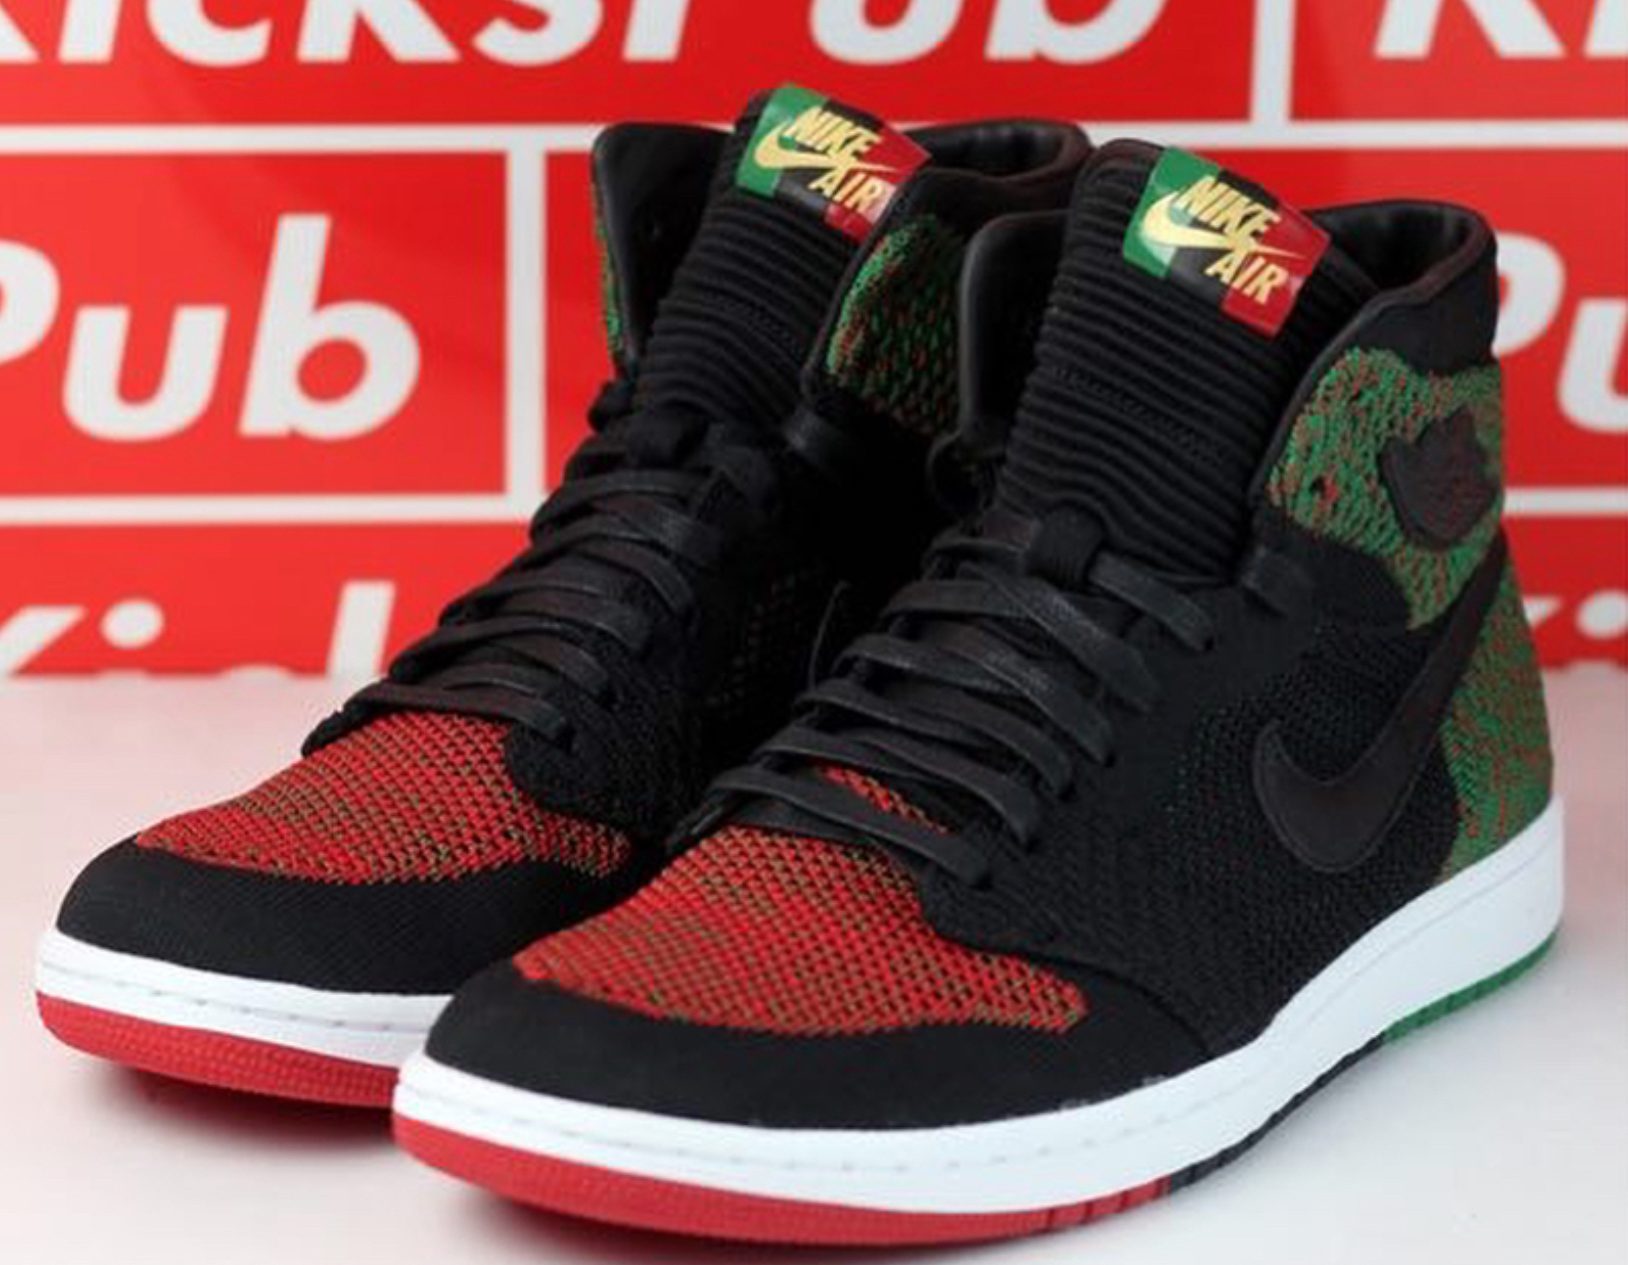 An Early Look at the Air Jordan 1 Retro High Flyknit 'BHM